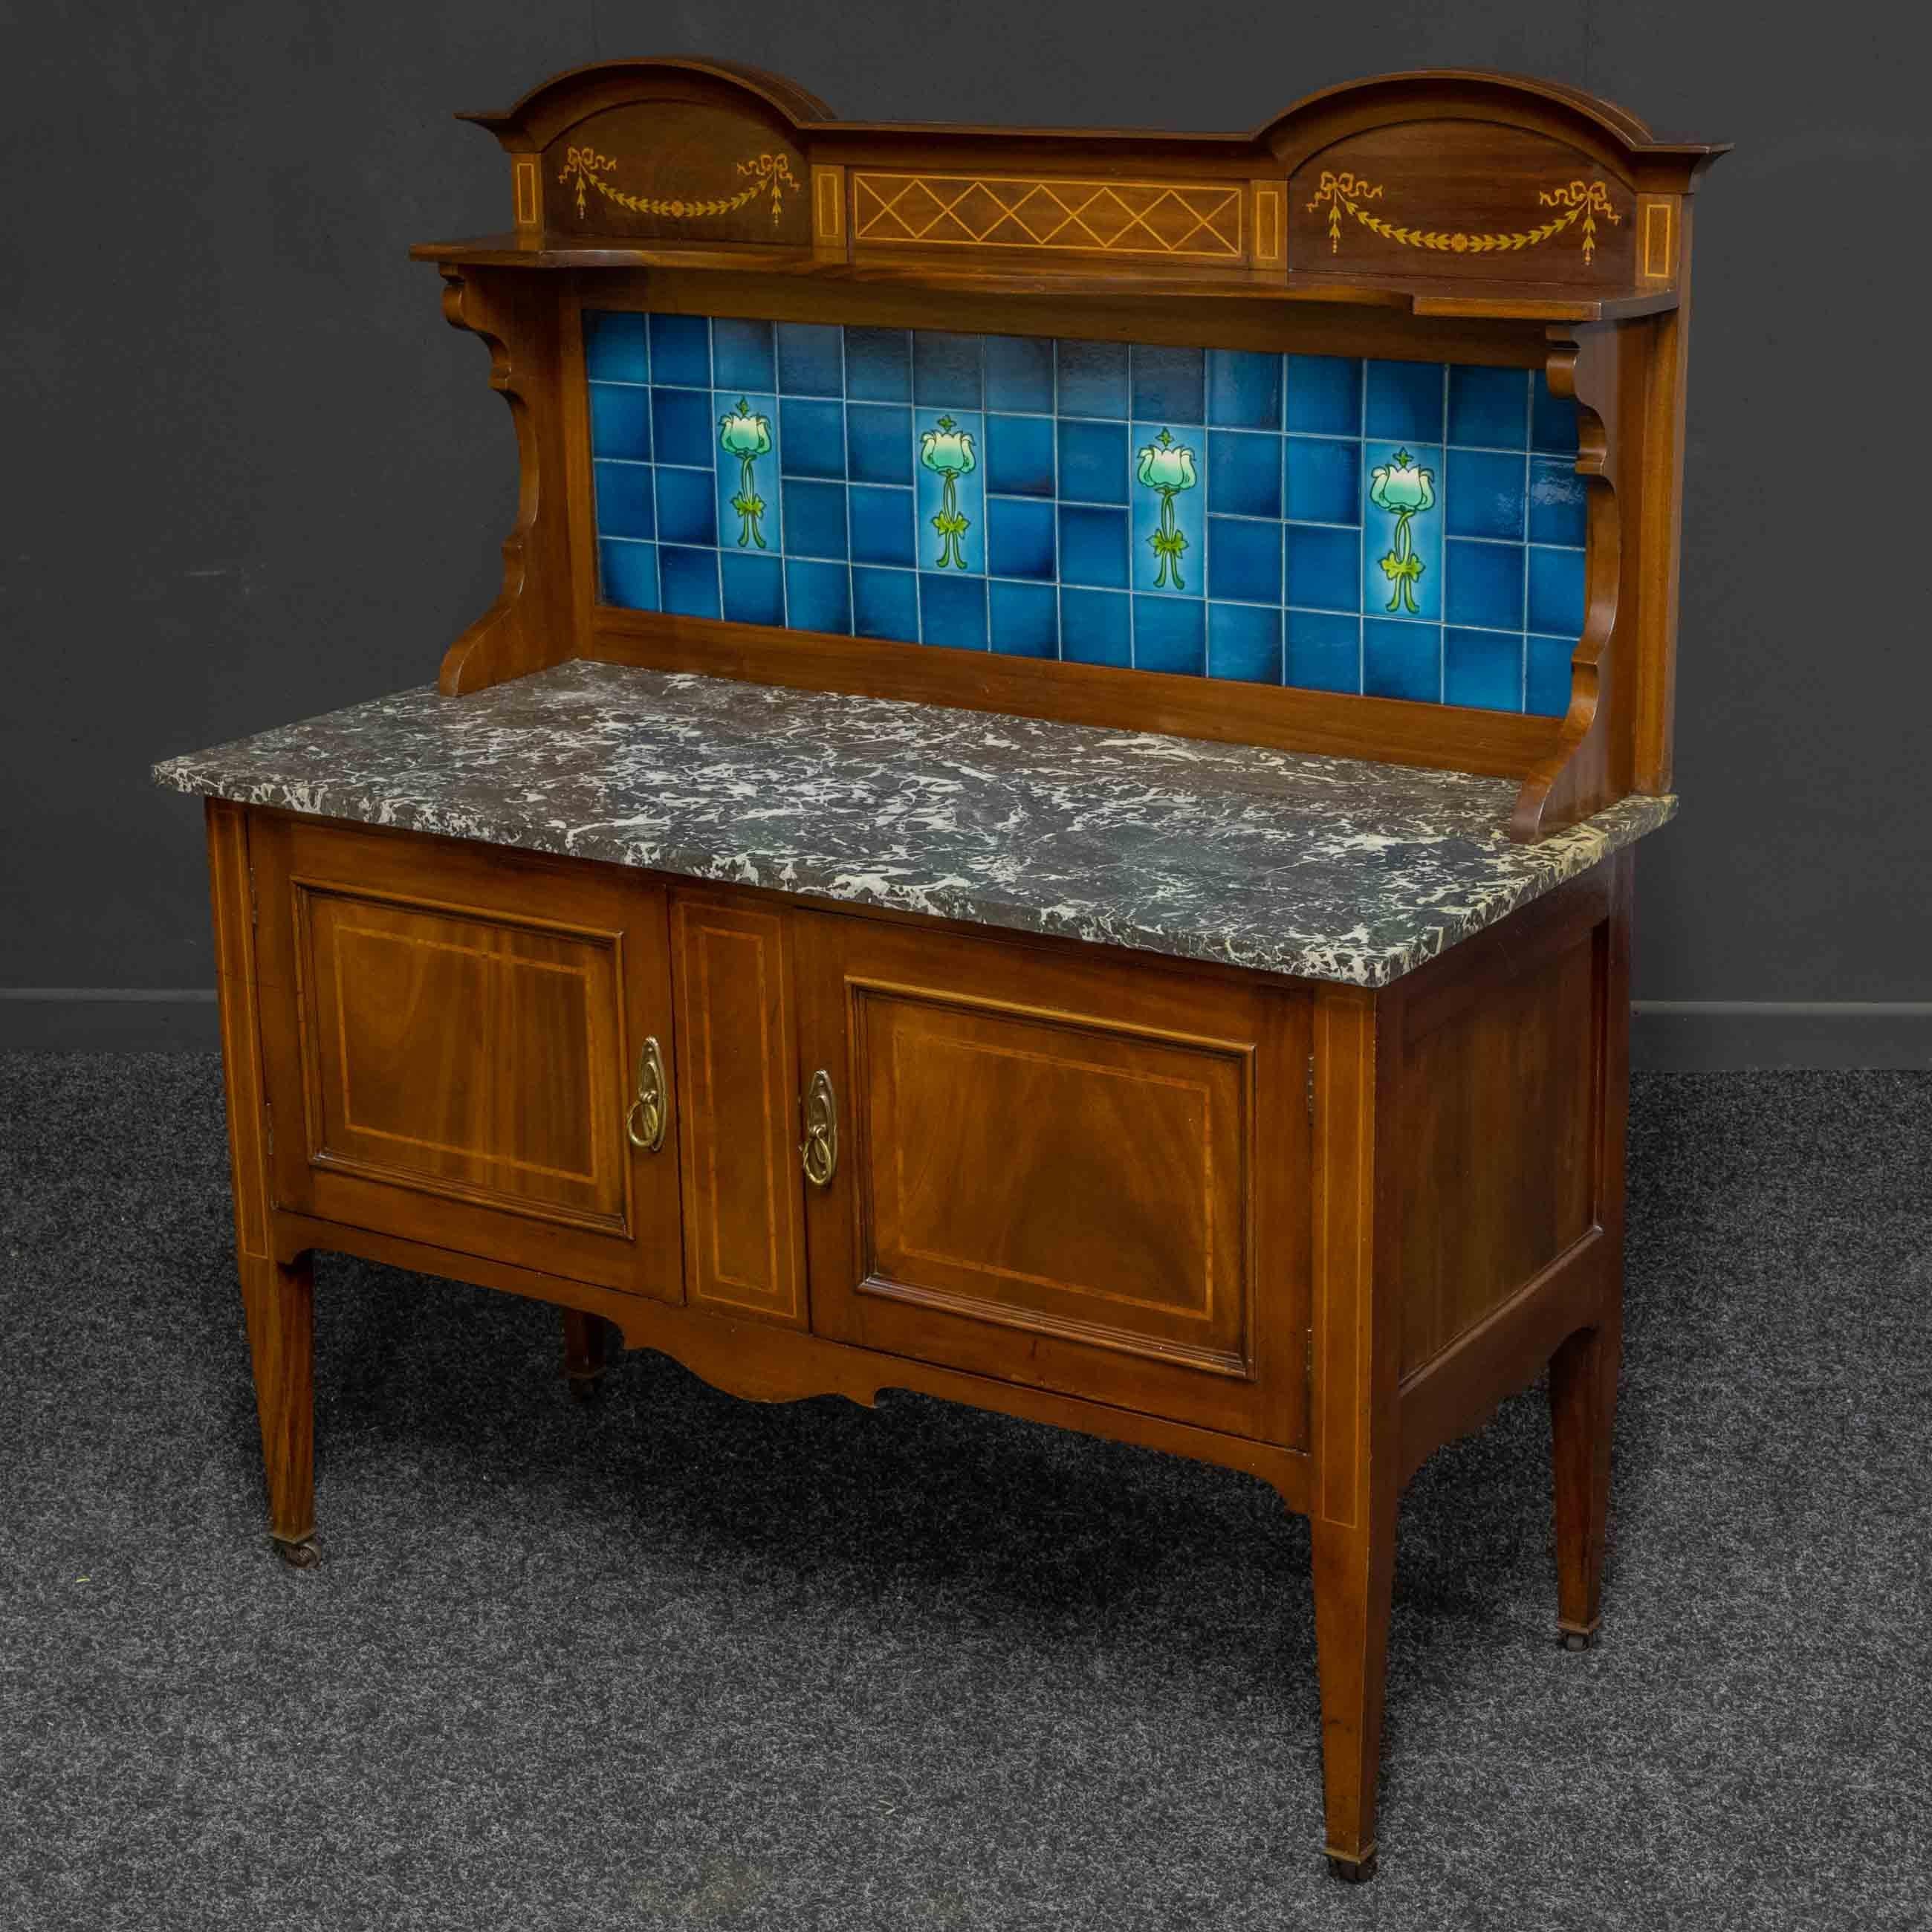 Edwardian Mahogany Washstand In Good Condition For Sale In Manchester, GB